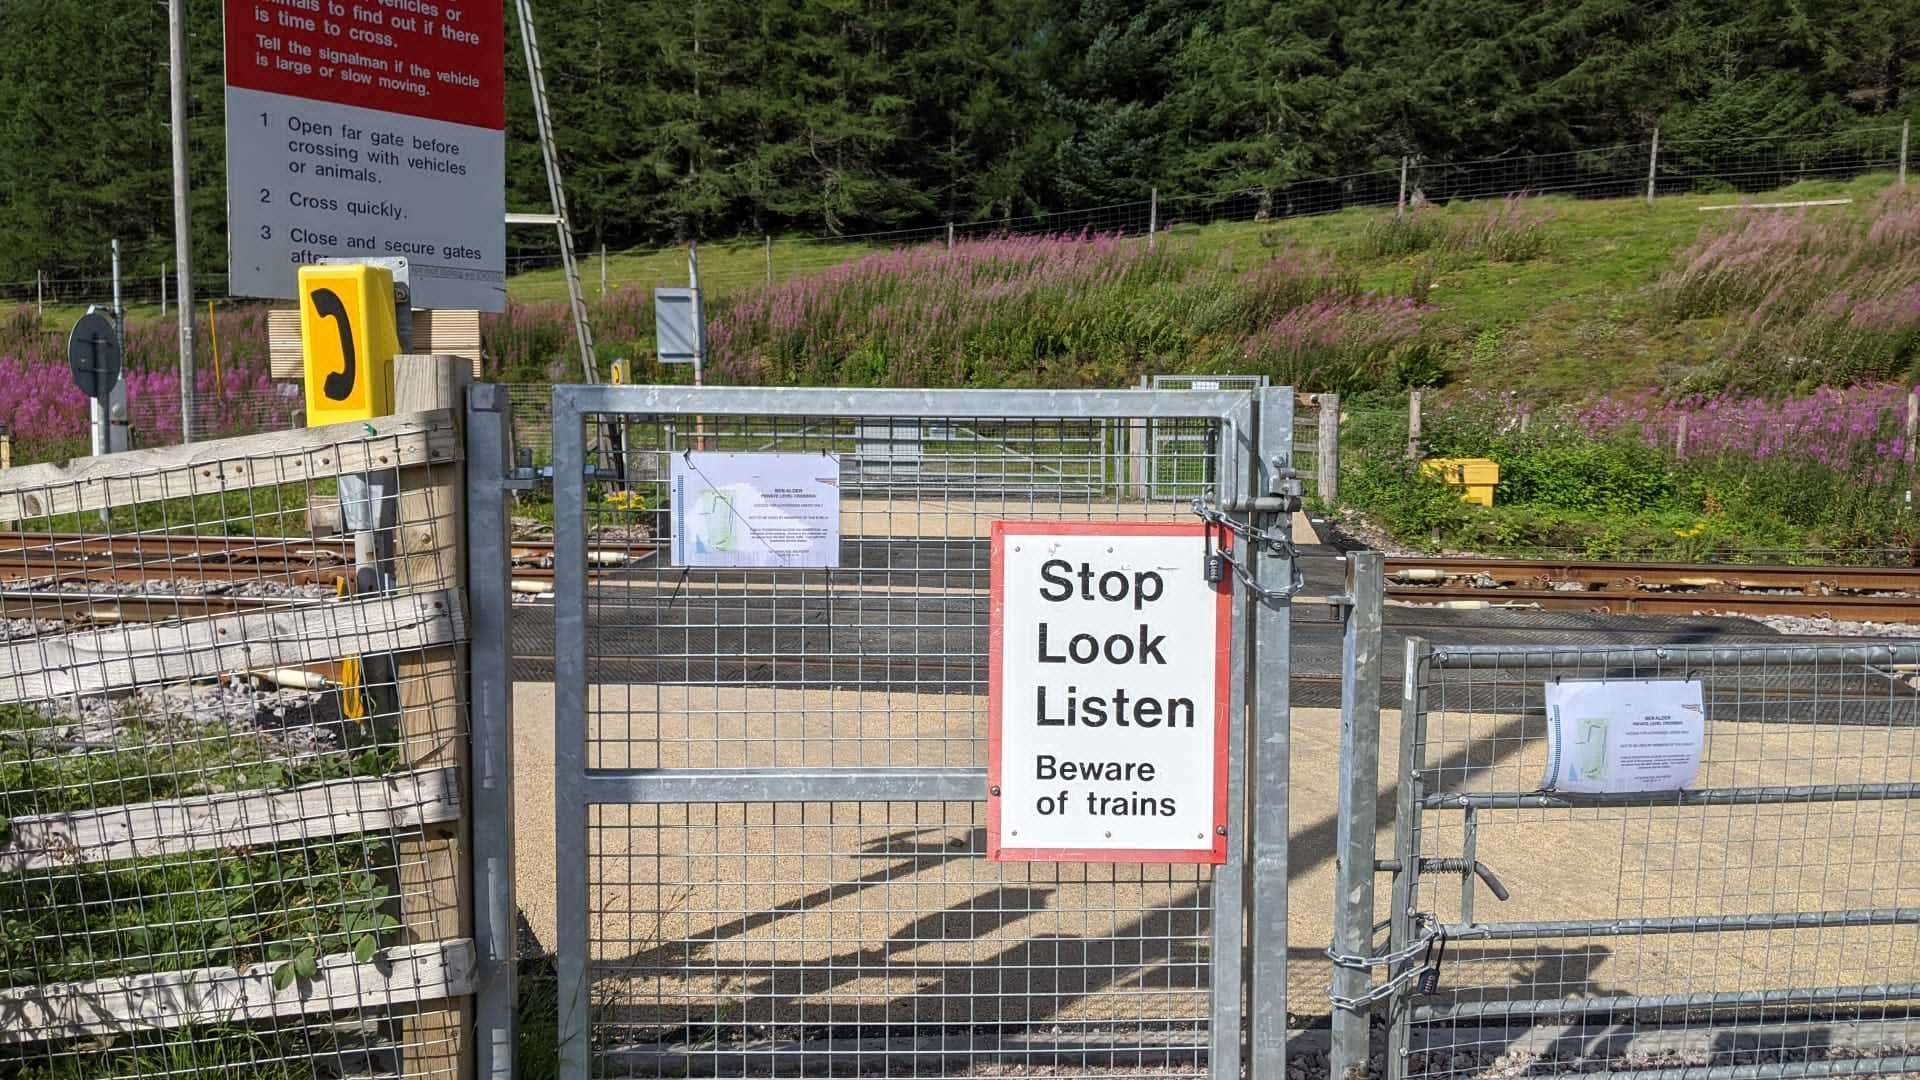 Network Rail has locked the gates at the crossing in Dalwhinnie.